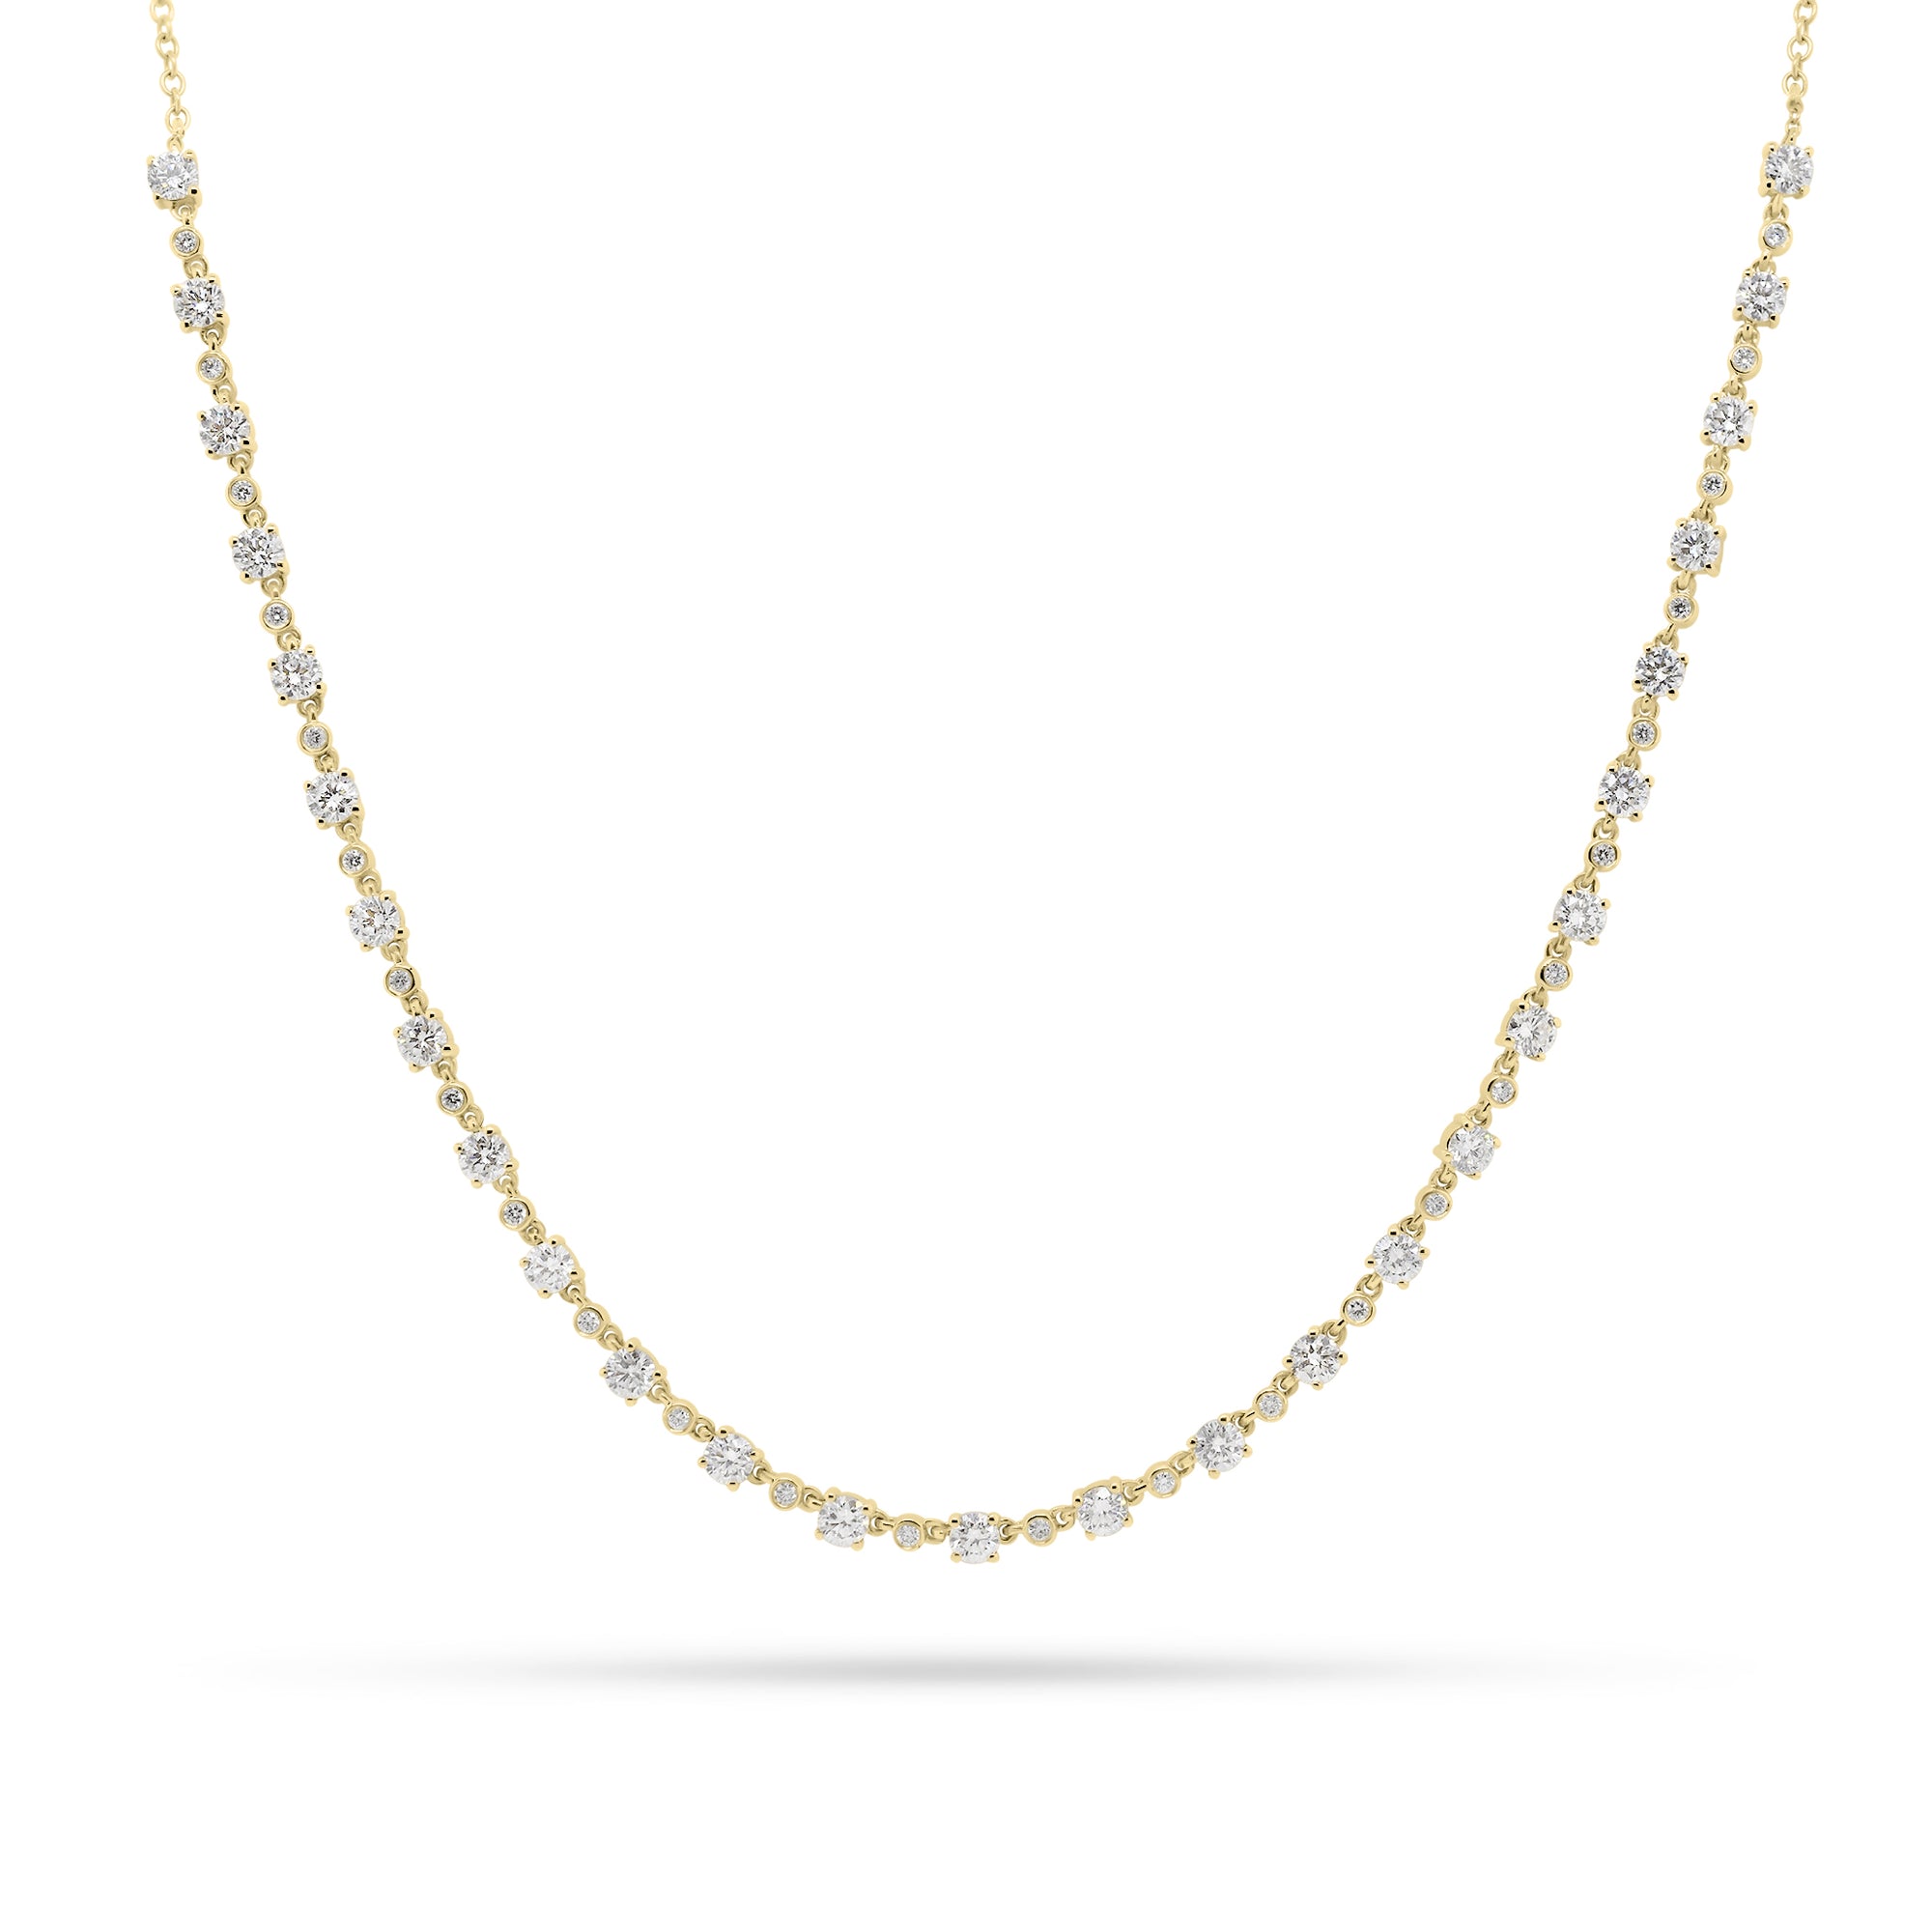 Round Diamond Chain Necklace  - 14K gold weighing 6.70 grams  - 53 round diamonds totaling 3.18 carats